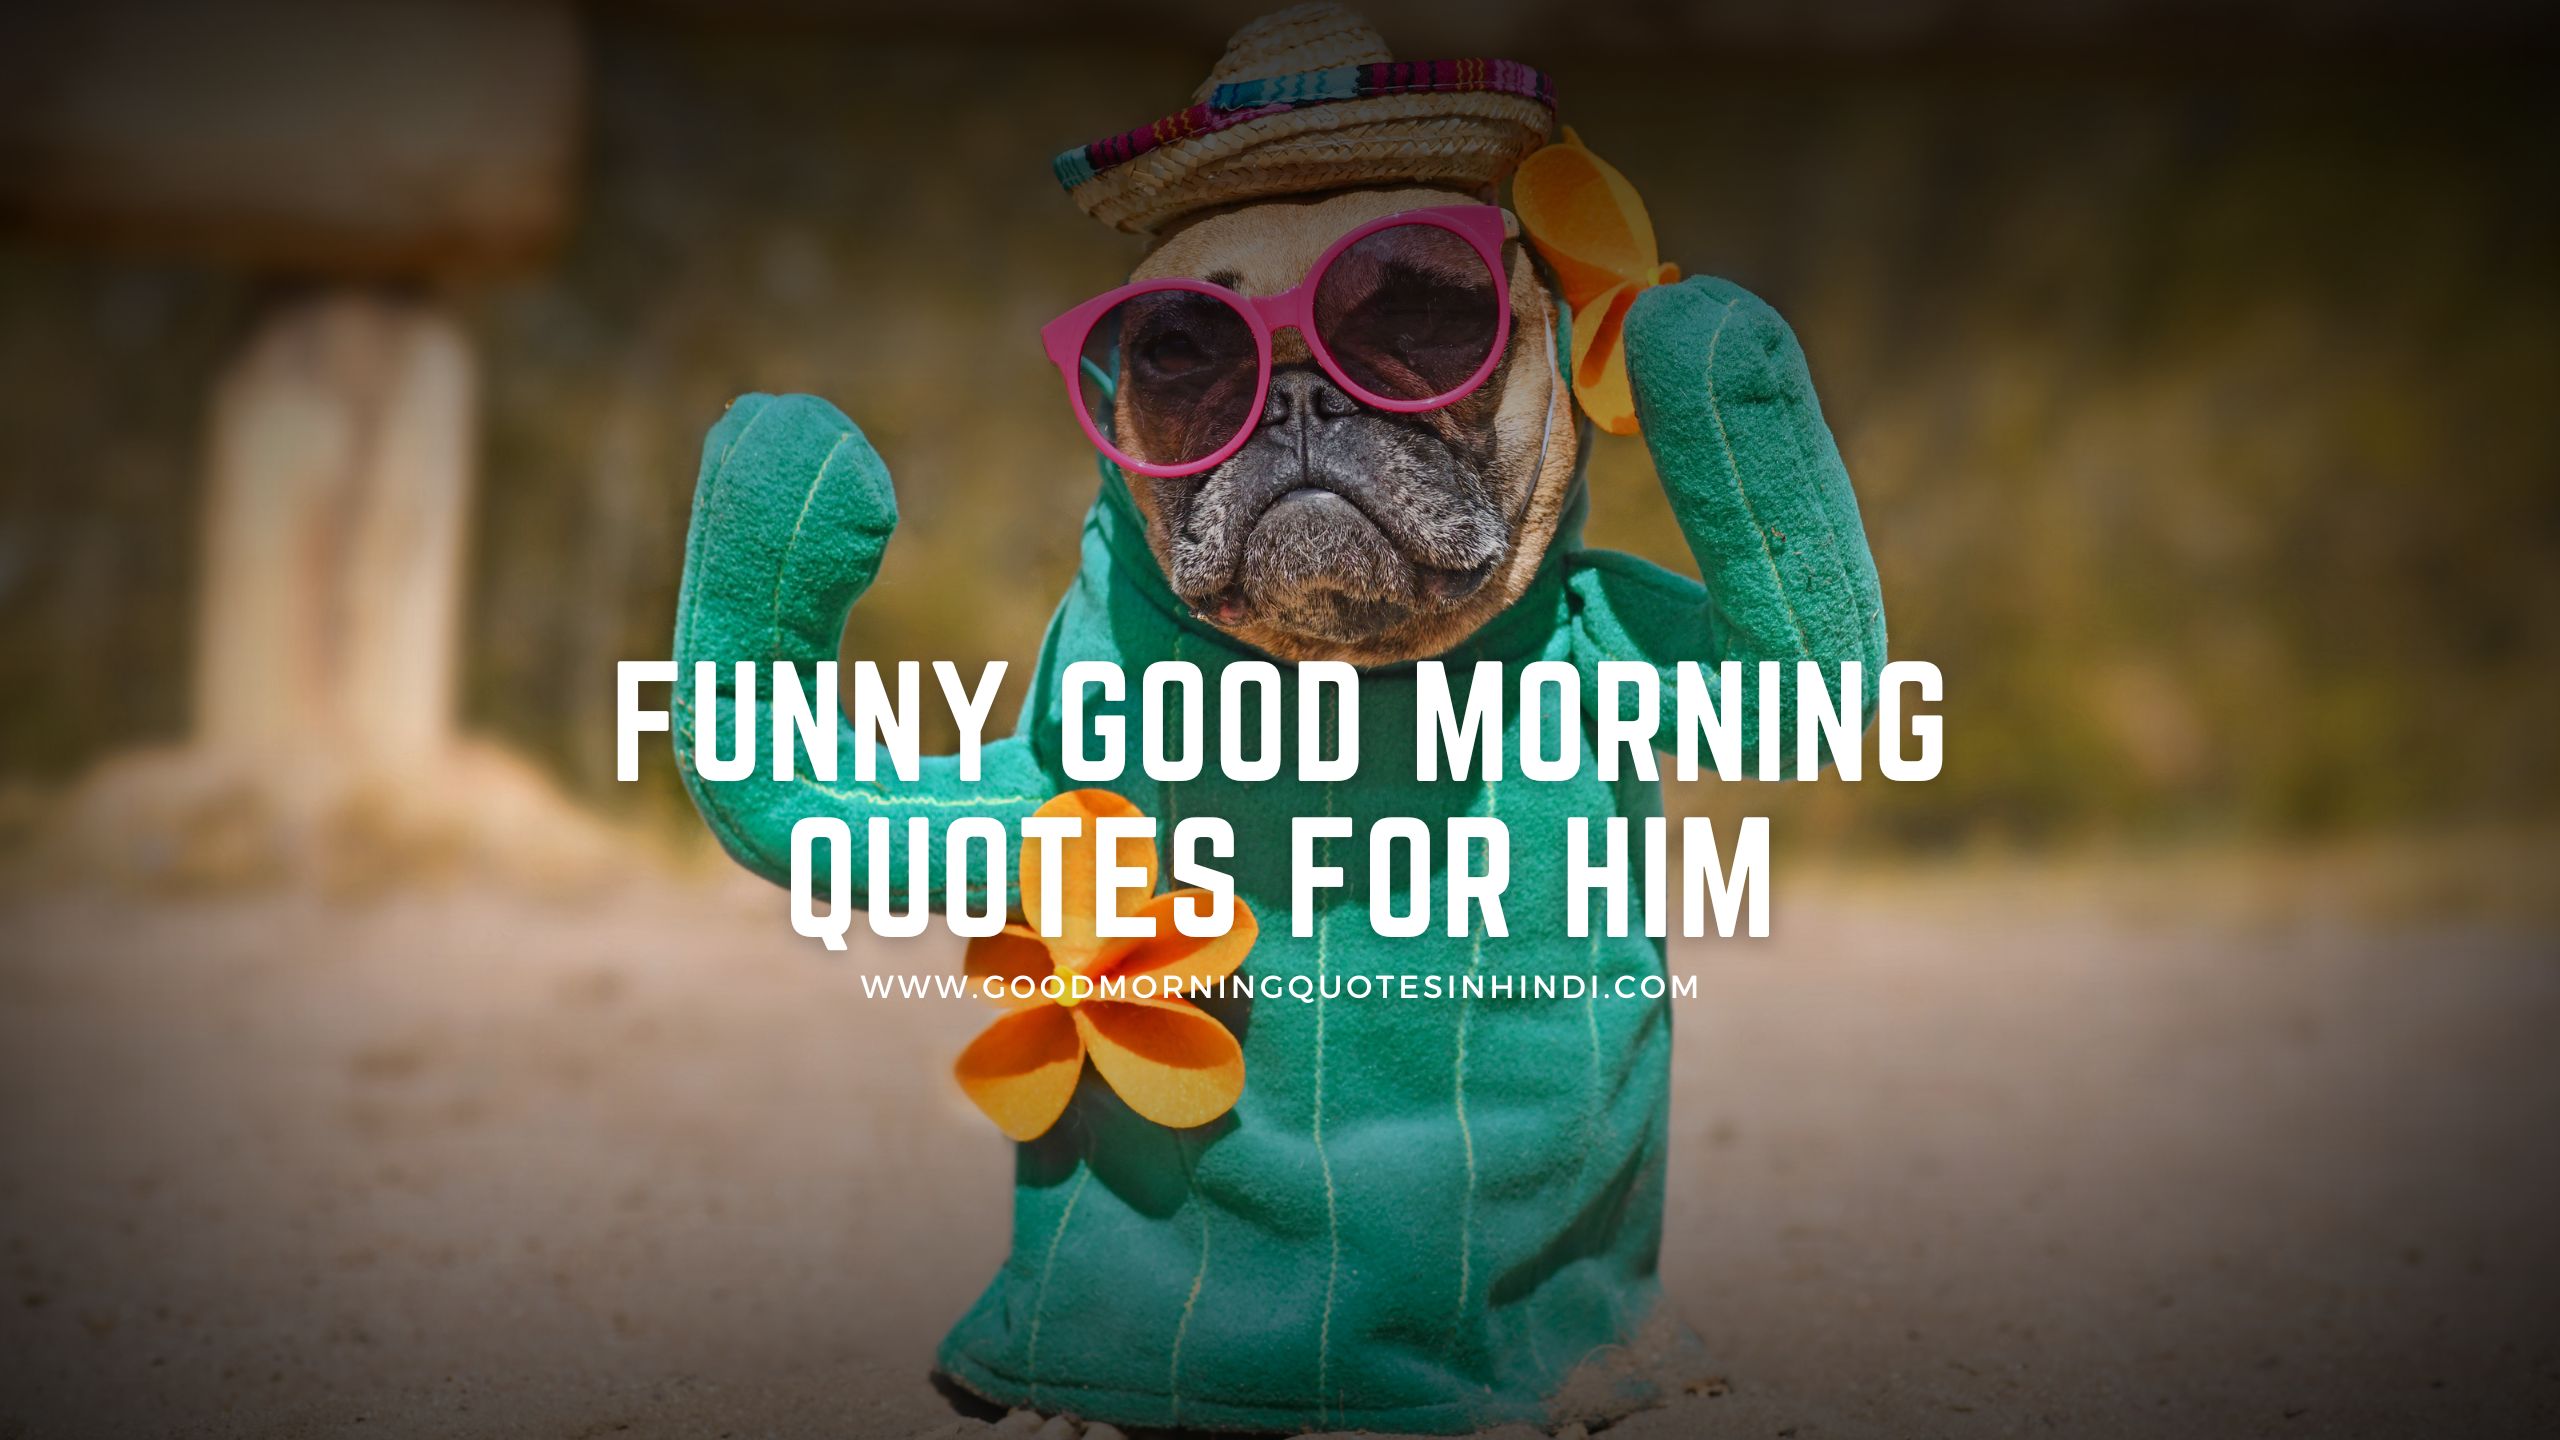 Funny Good Morning Quotes For Him - Humorous quotes to make him laugh in the morning